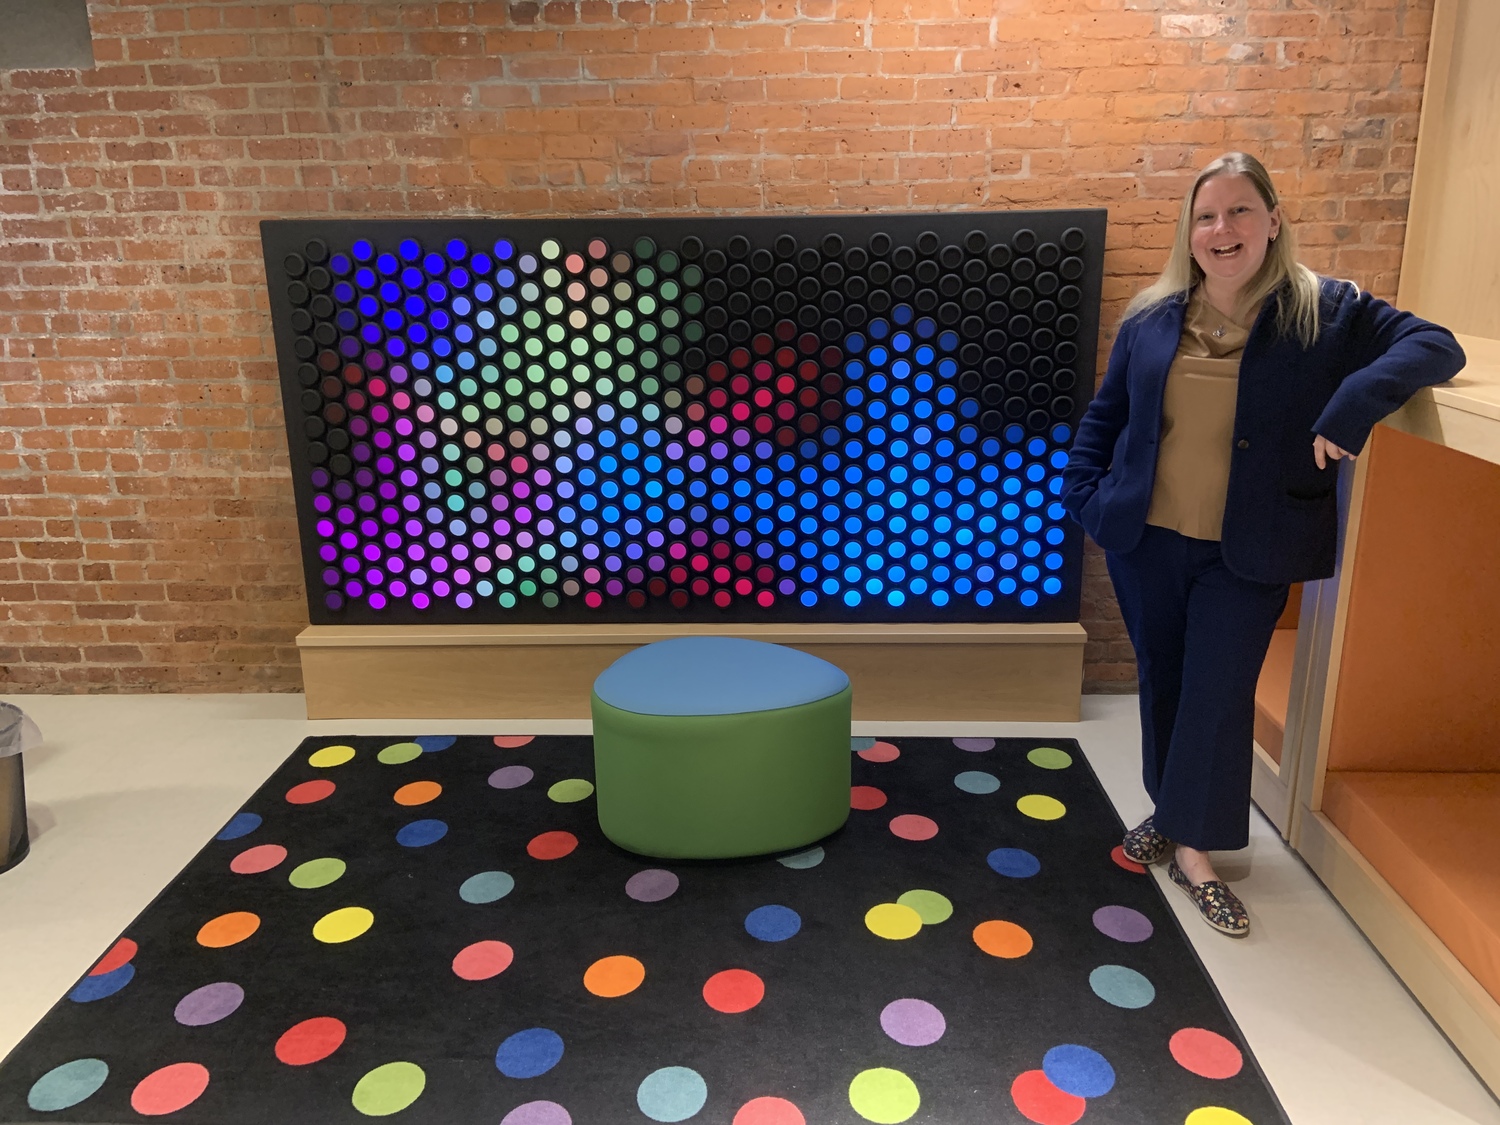 Kelly Harris, the director of the John Jermain Memorial Library, with the new Everbright Board in the newly renovated children's section. STEPHEN J. KOTZ